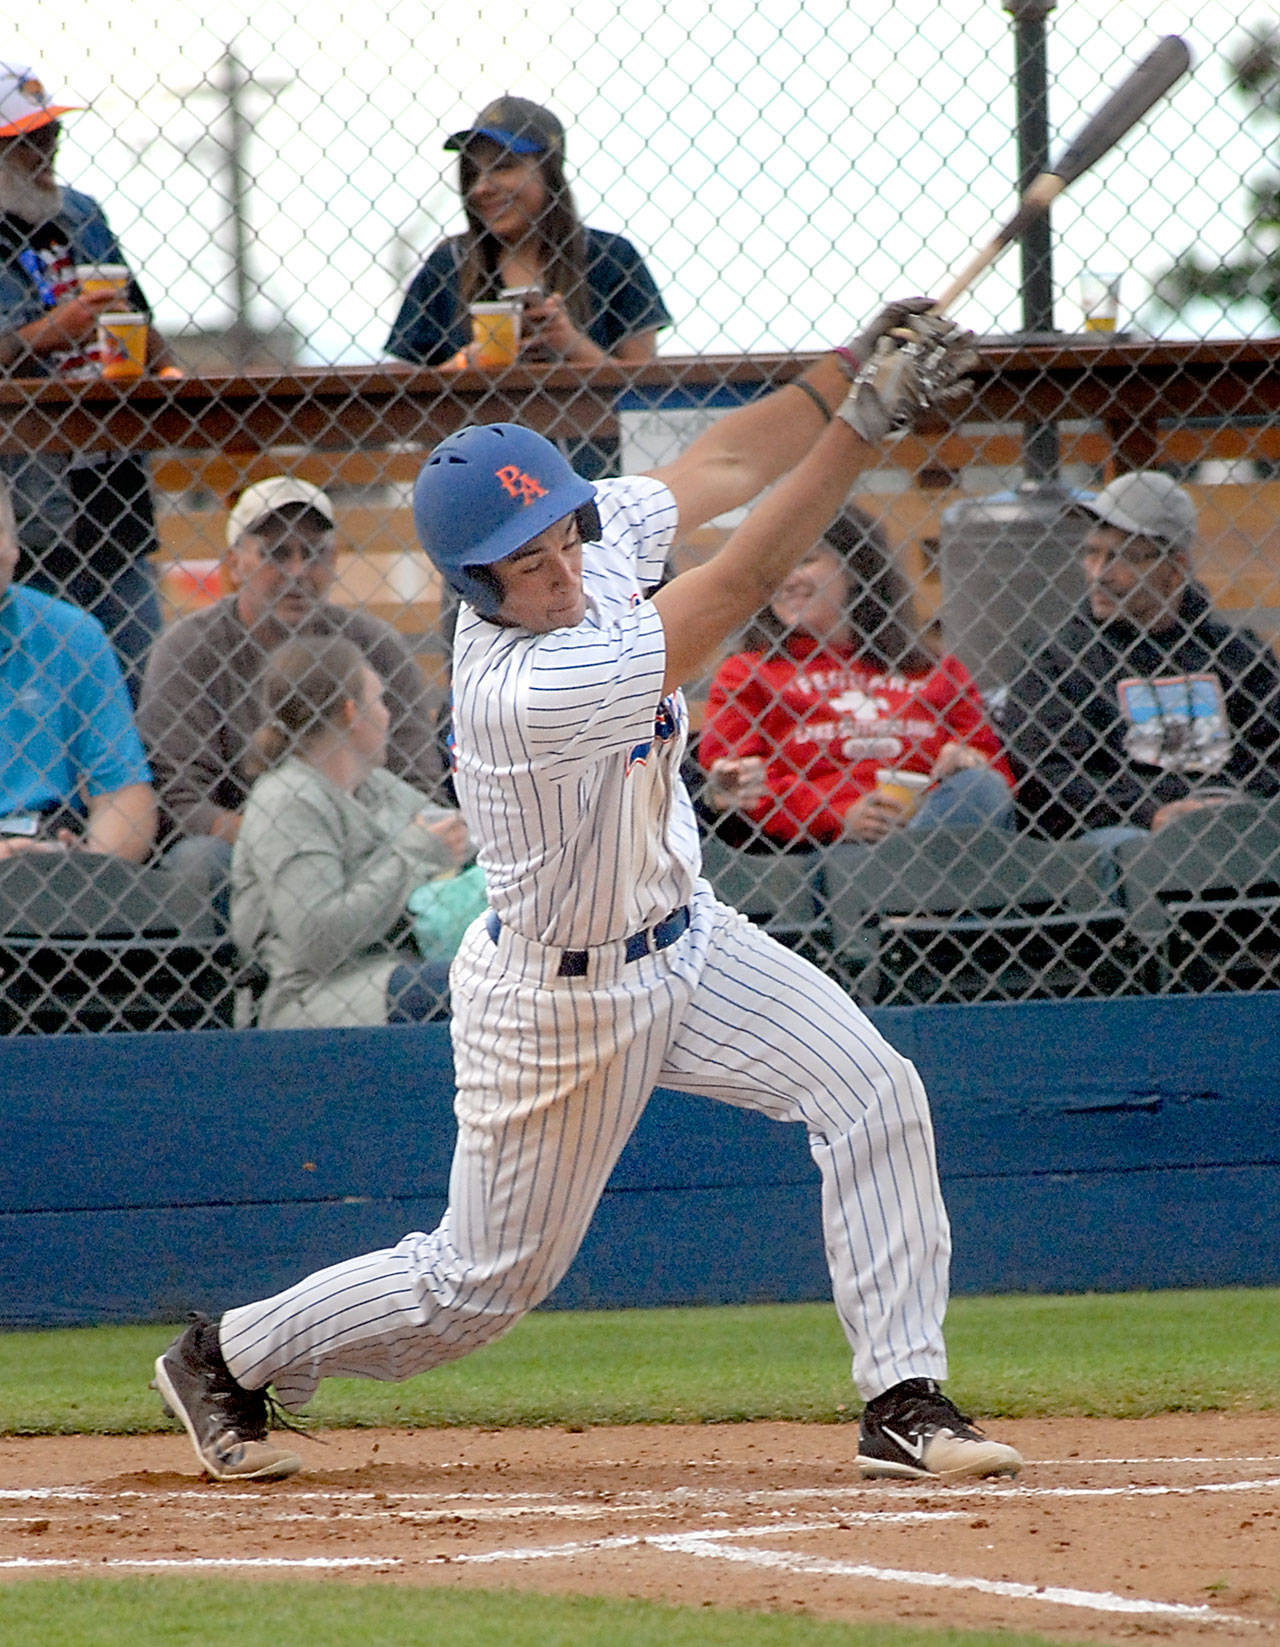 Keith Thorpe/Peninsula Daily News Lefties’ Jason Dicochea bats in a July 6 game against the Yakima Pippins at Port Angeles Civic Field.